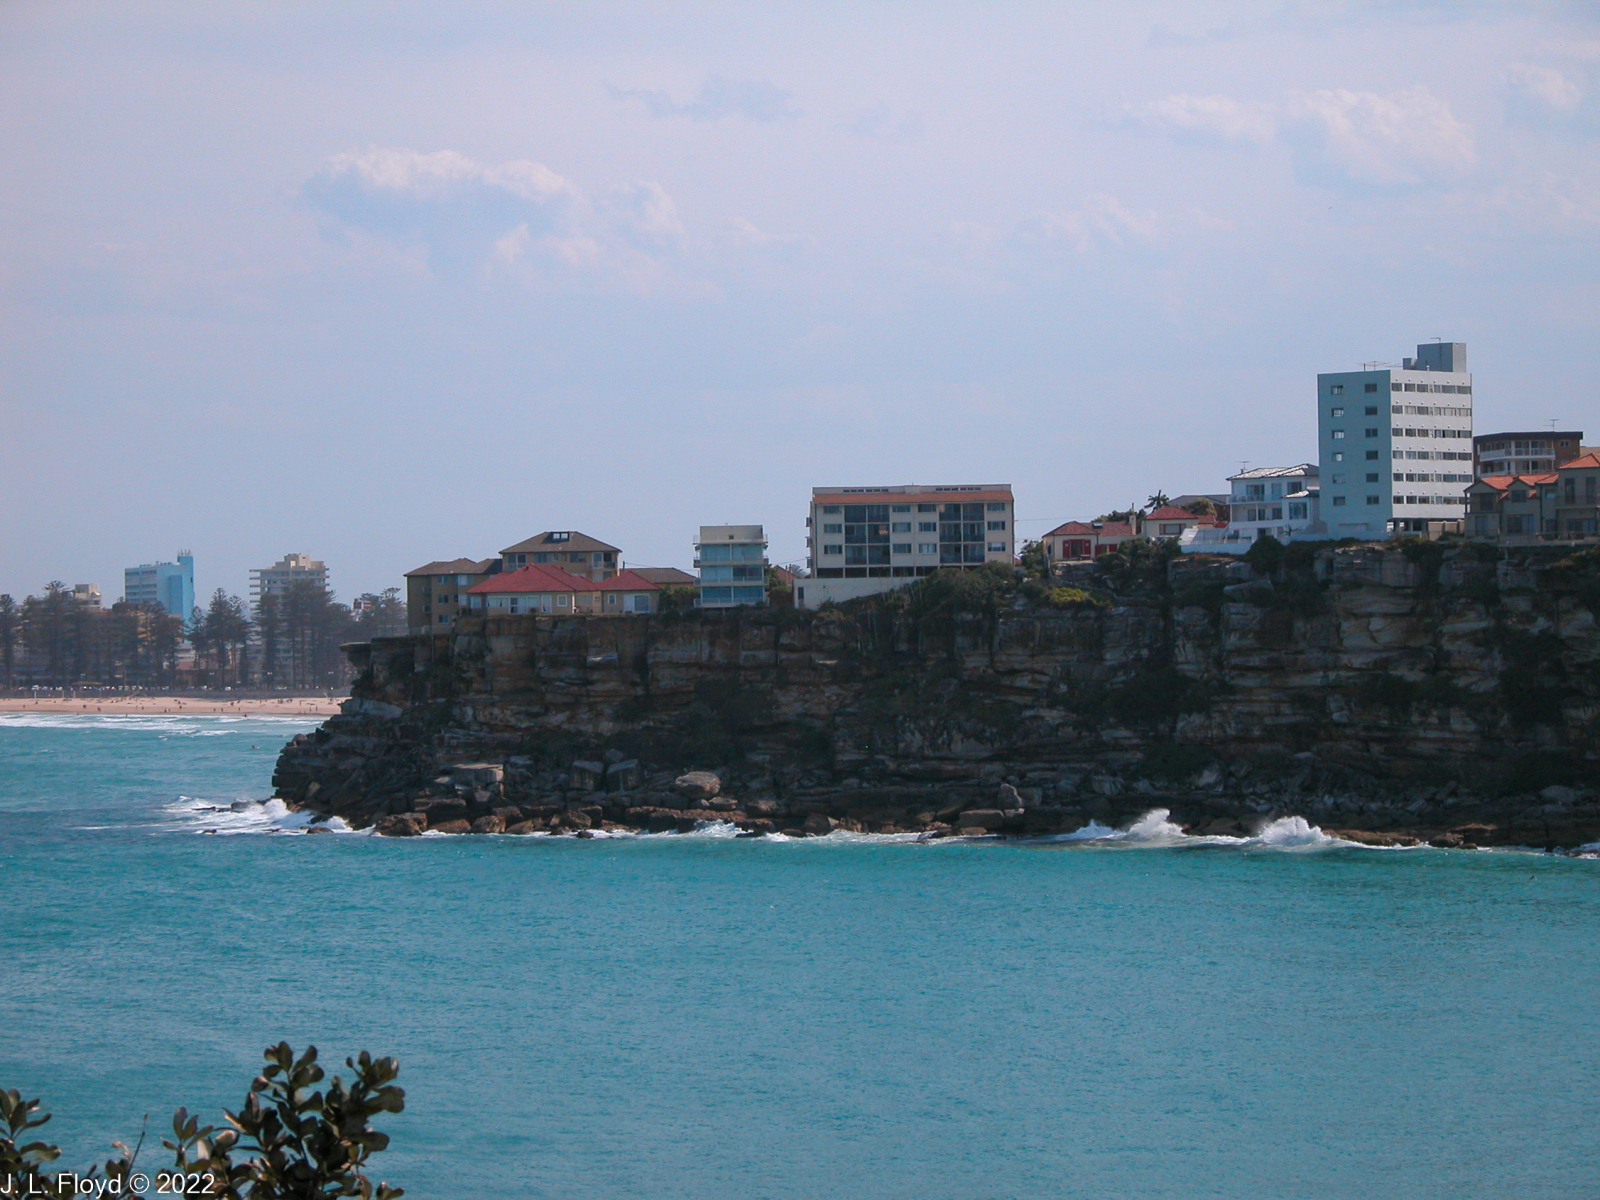 Houses and condos on the cliffs of north Sydney